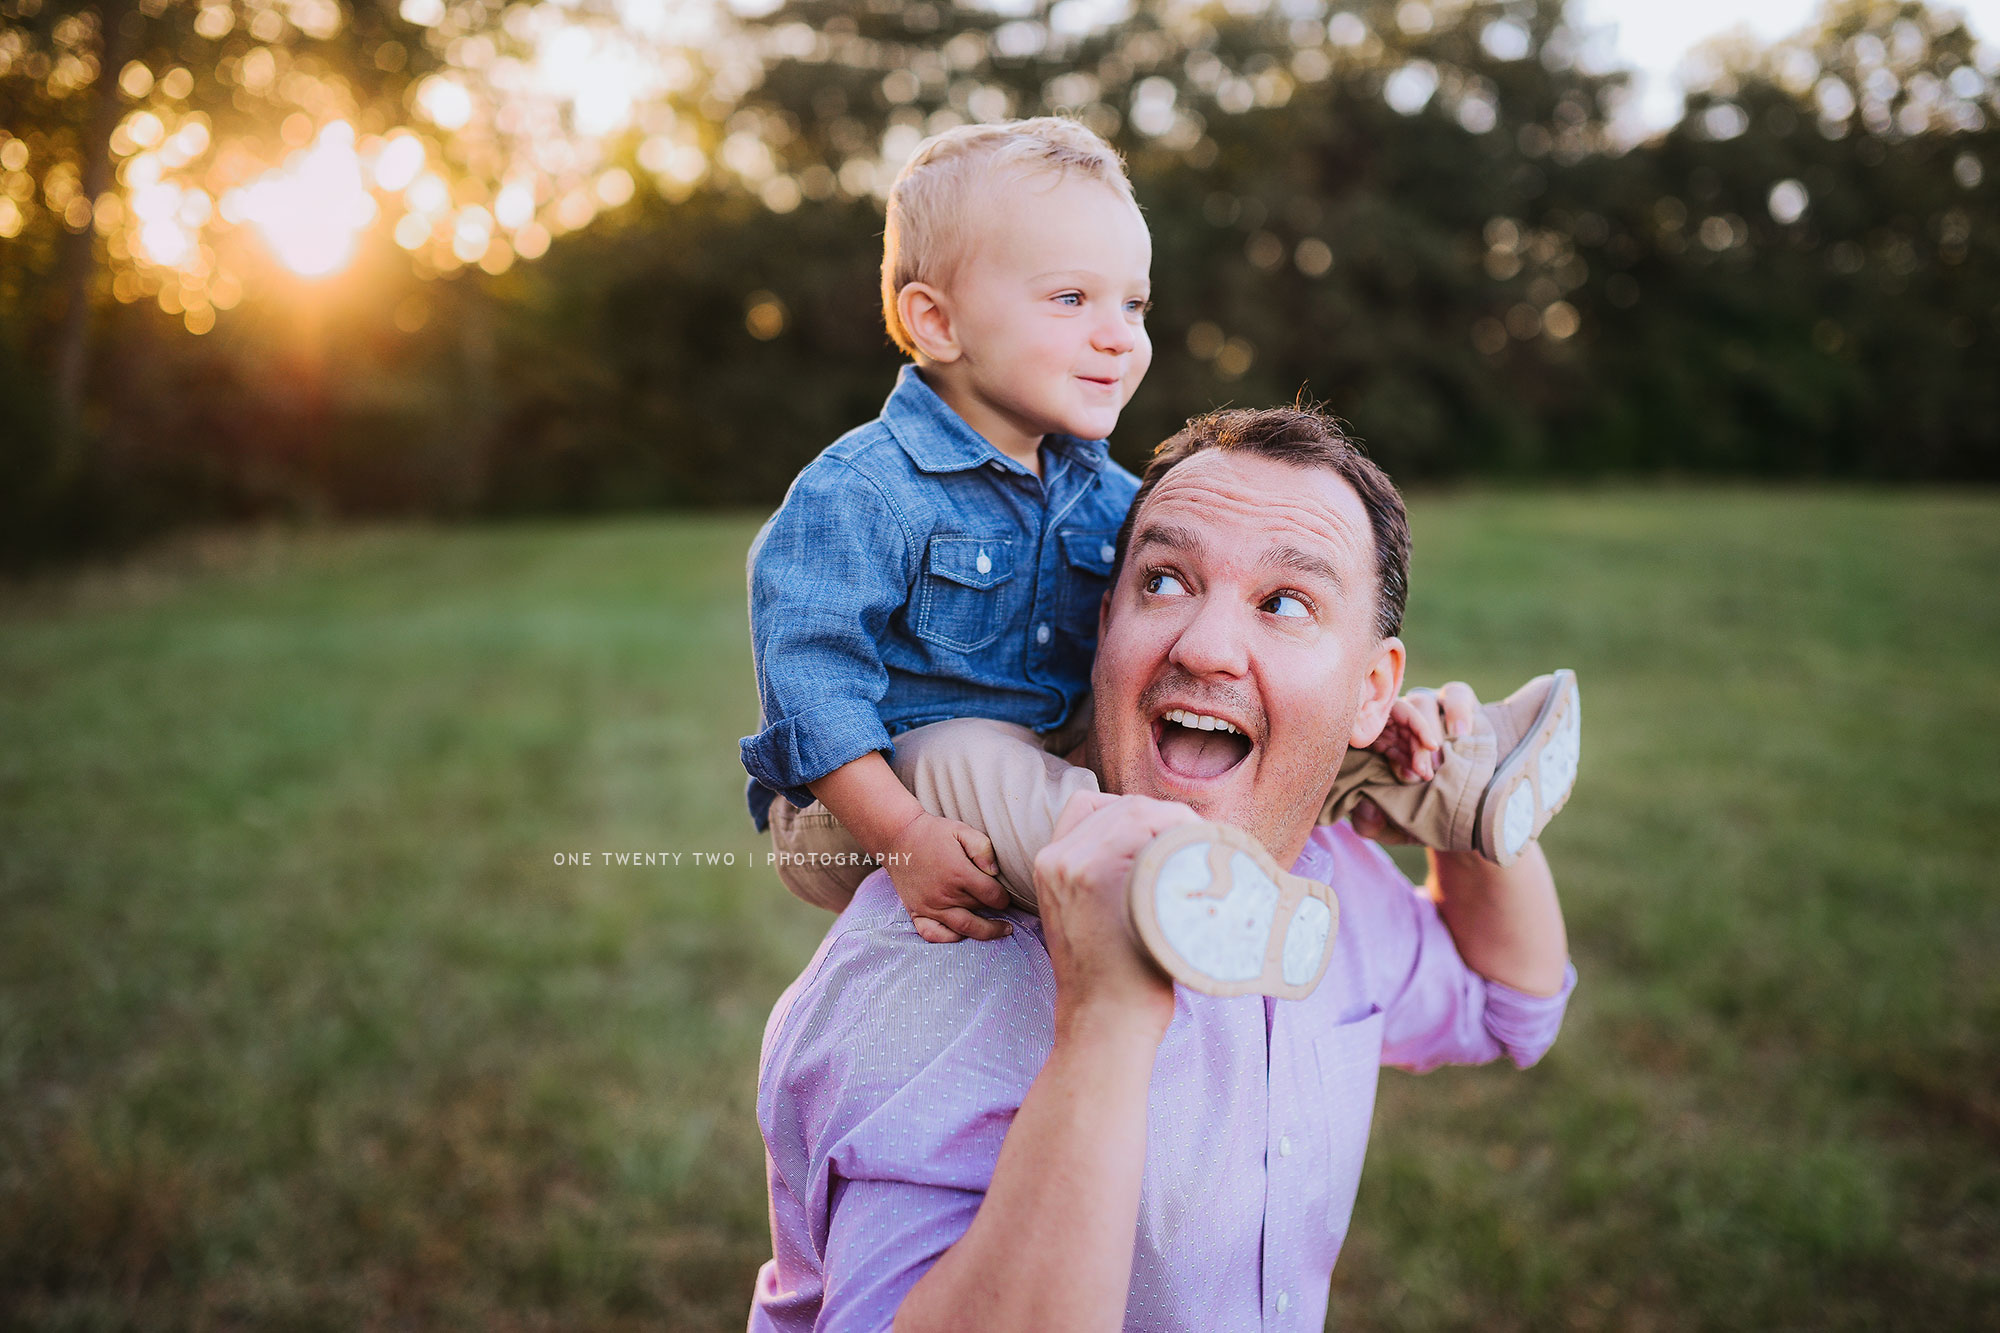 webster-groves-missouri-dad-with-toddler-one-twenty-two-photography.jpg